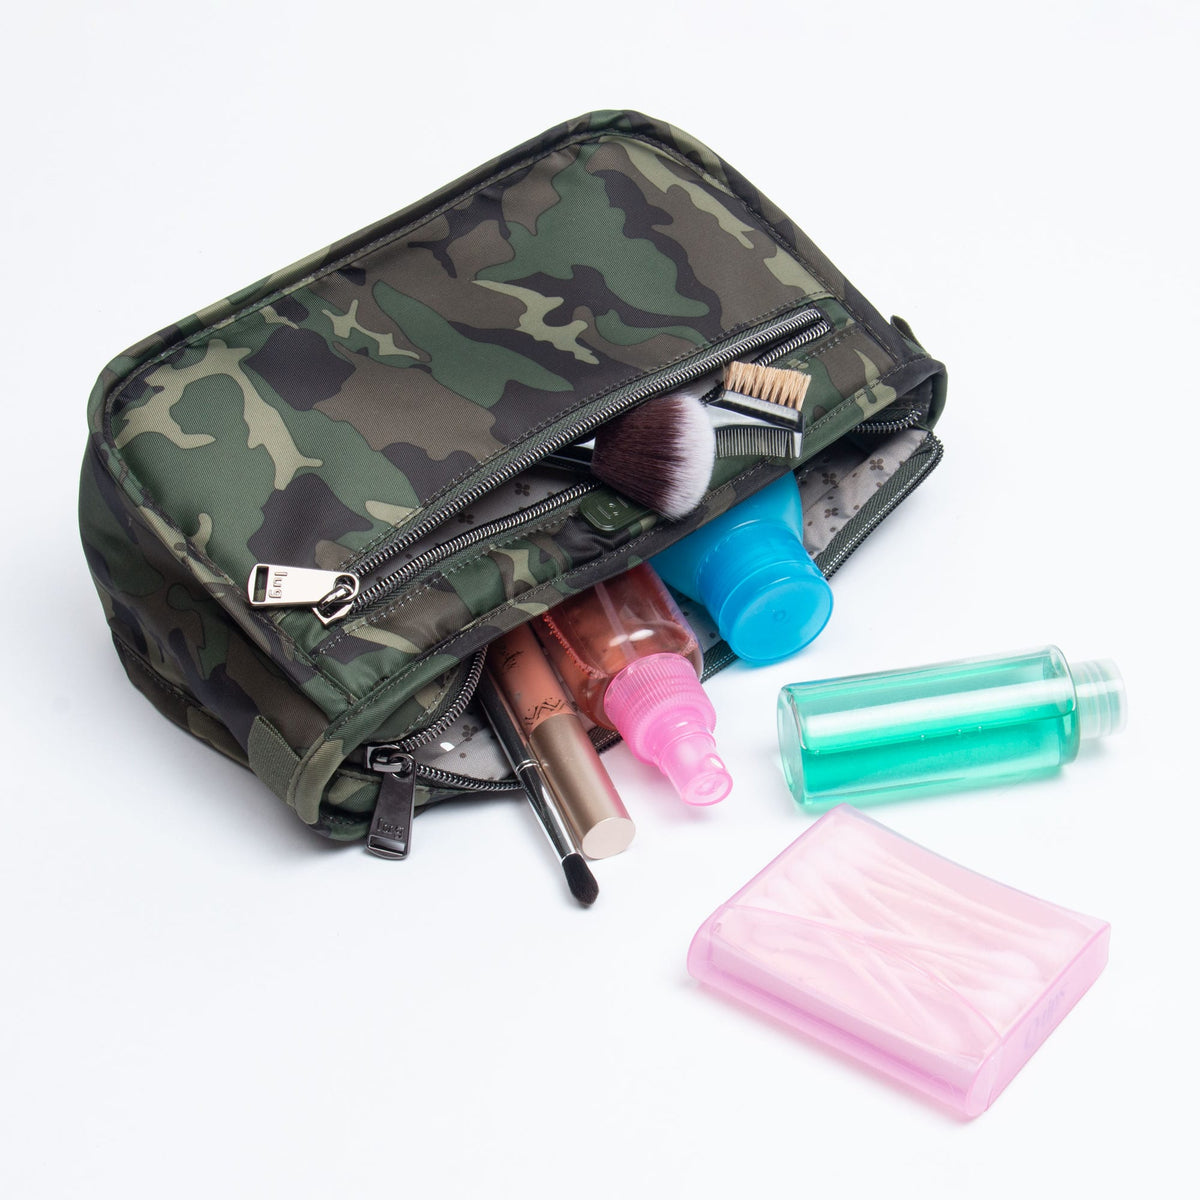 Parasail Cosmetic Case